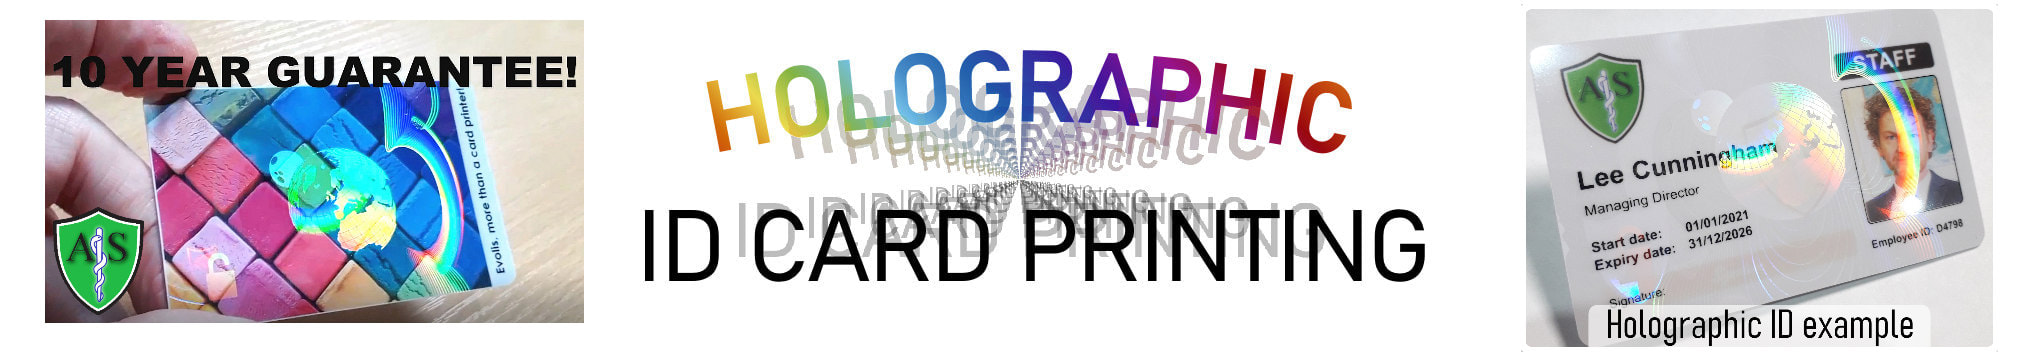 Northampton holographic ID card print service. Employee Identity cards with hologram or holograph security mark.